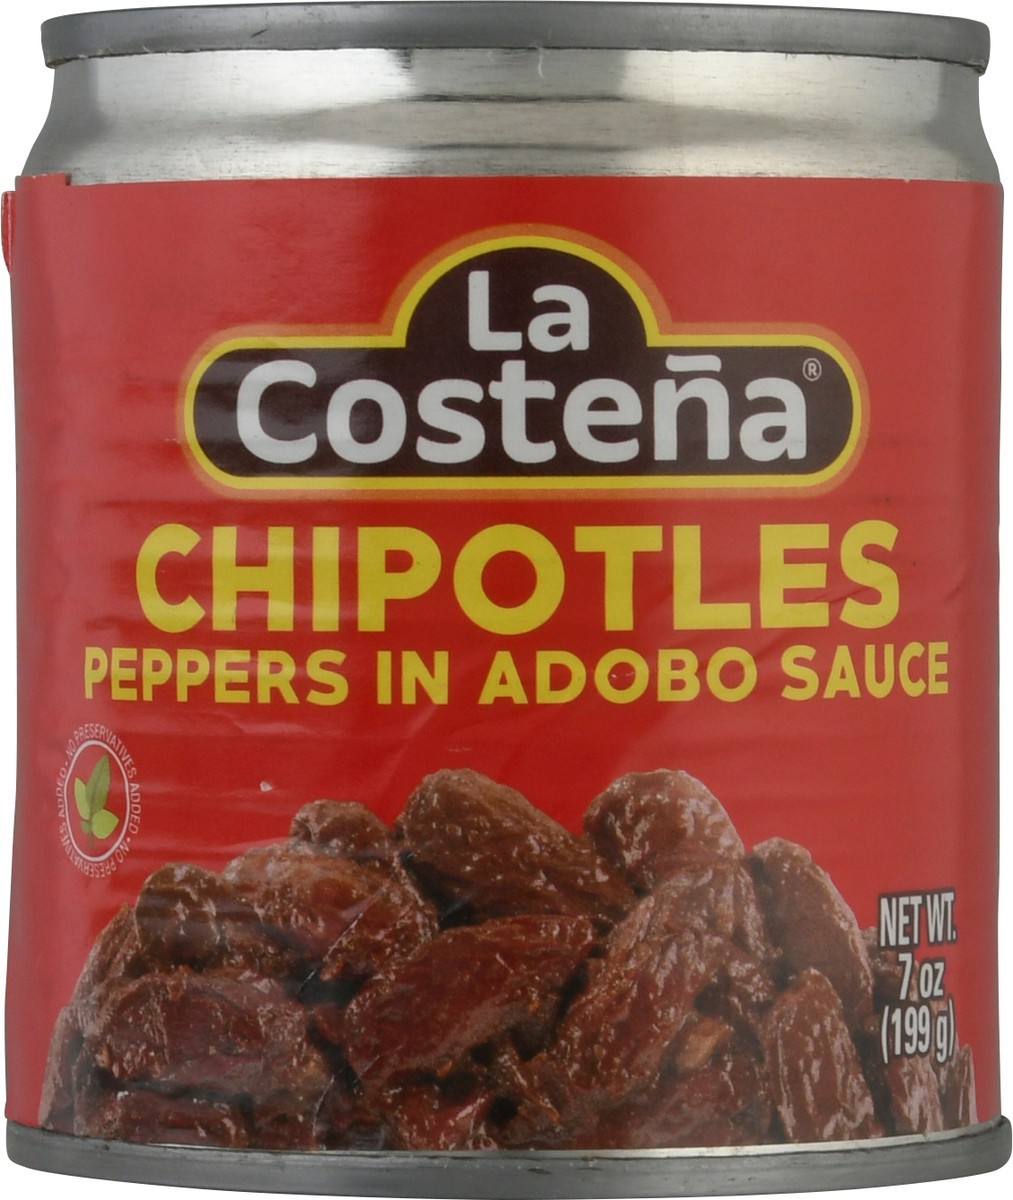 slide 2 of 12, La Costeña Chipotle Peppers in Adobo Sauce, 7 oz